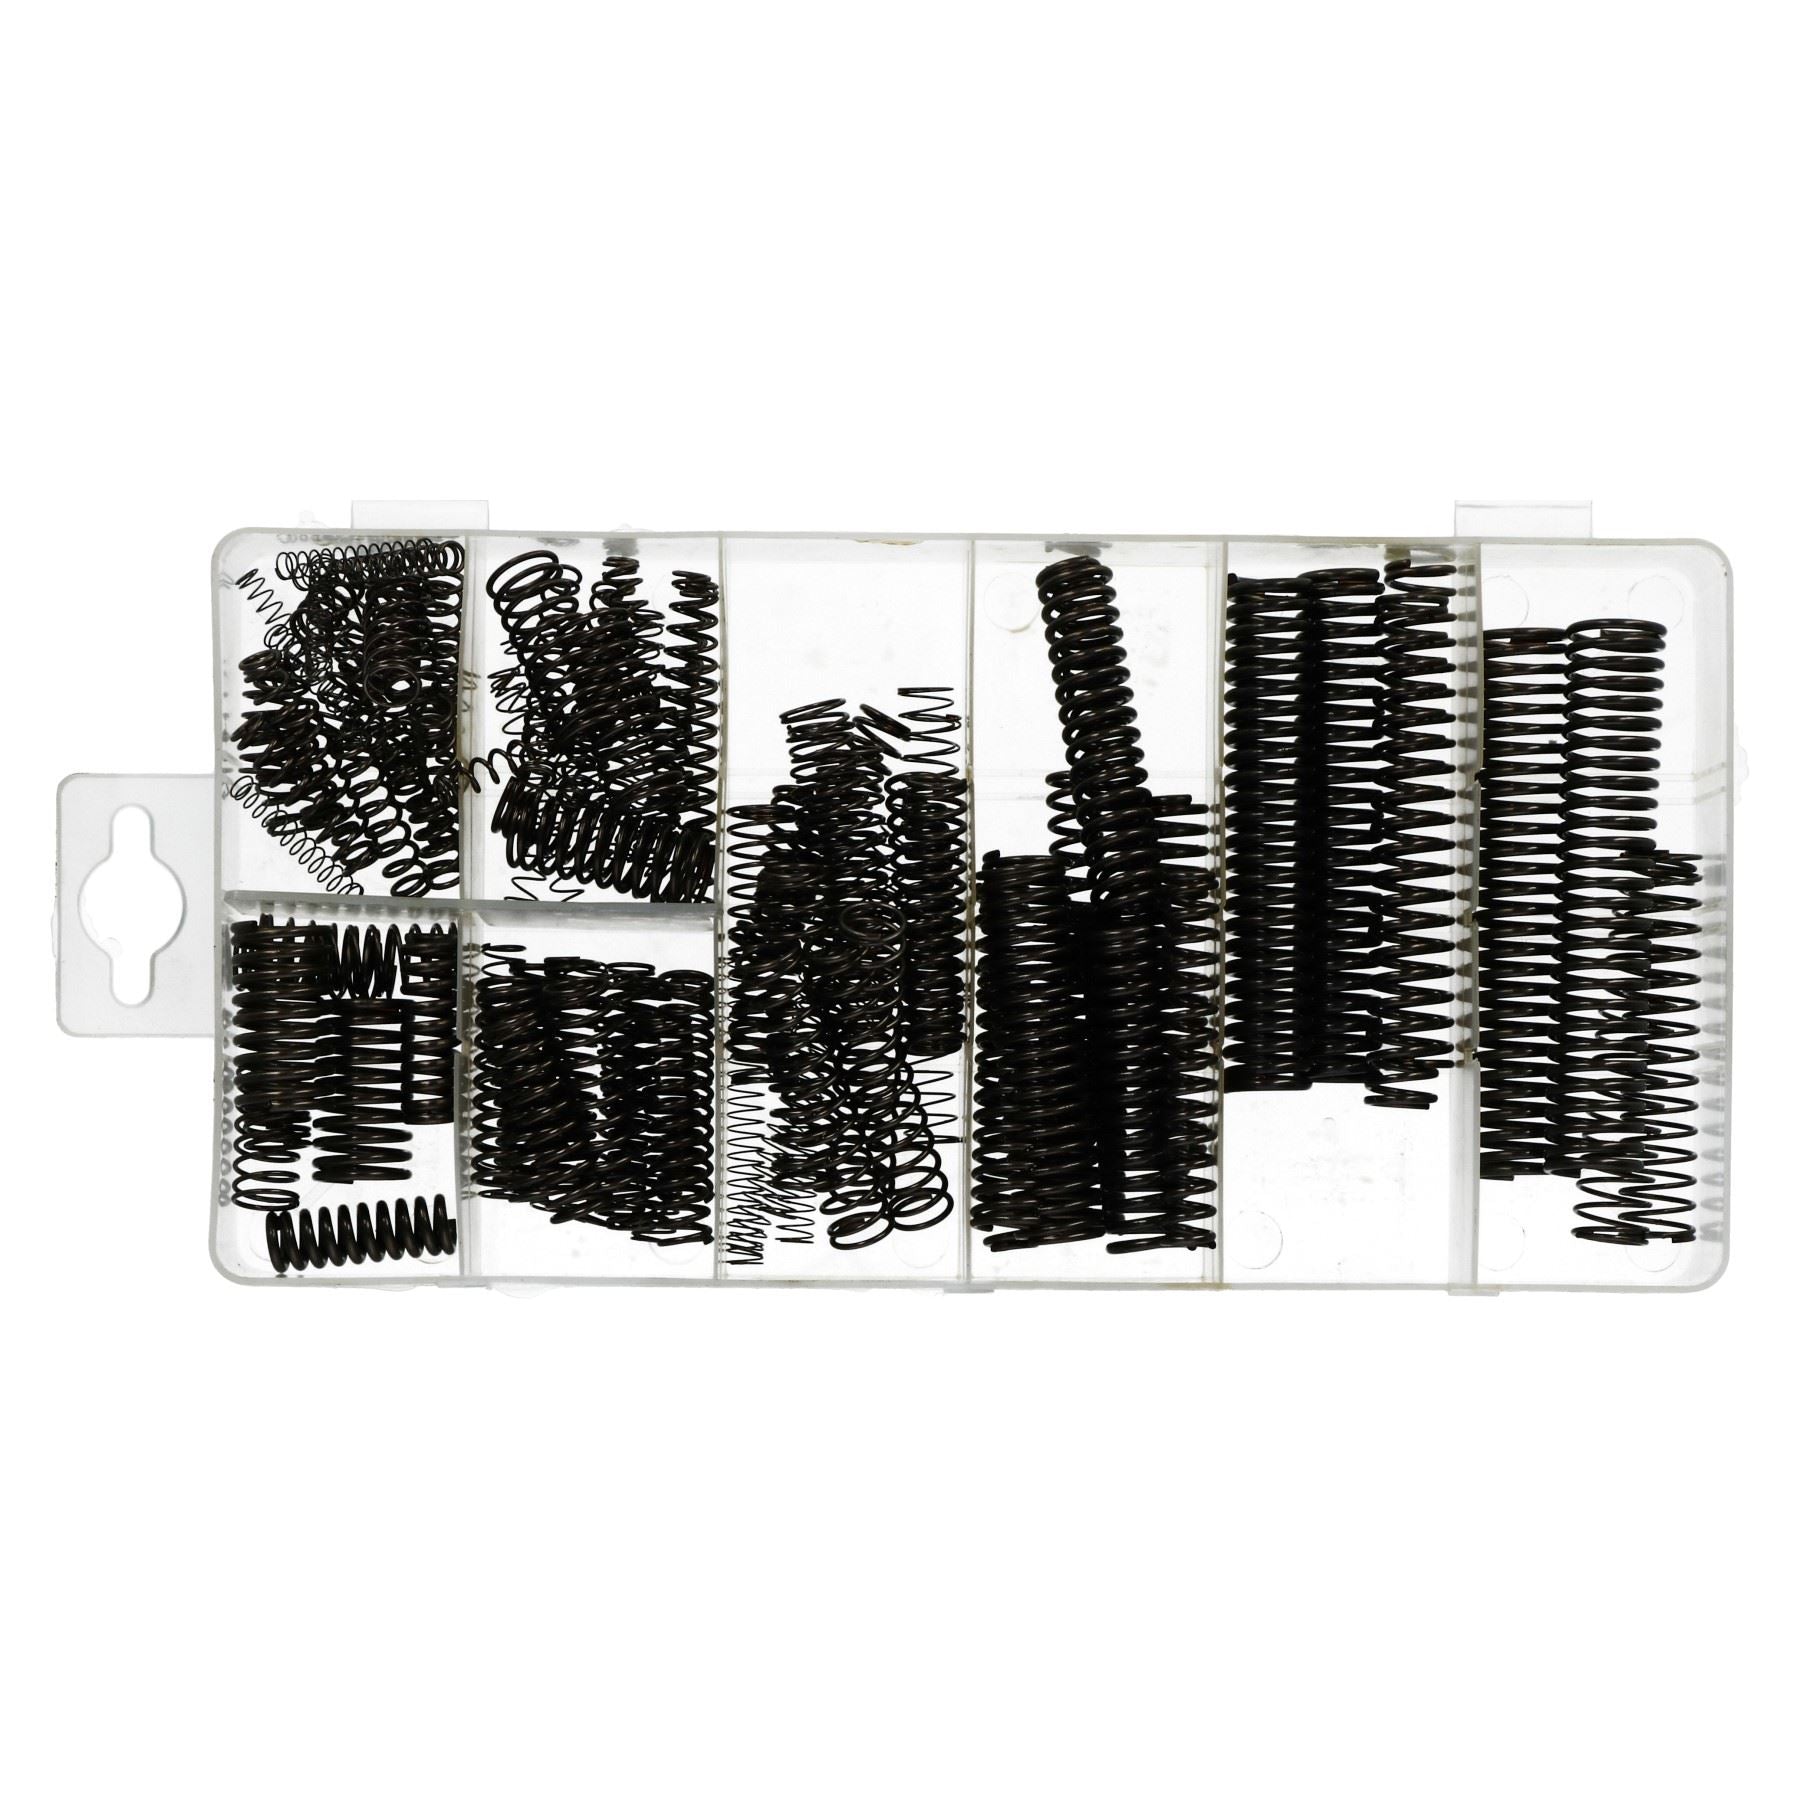 114pc Compression Spring Extension Tension Extended Springs Coil Black Finish